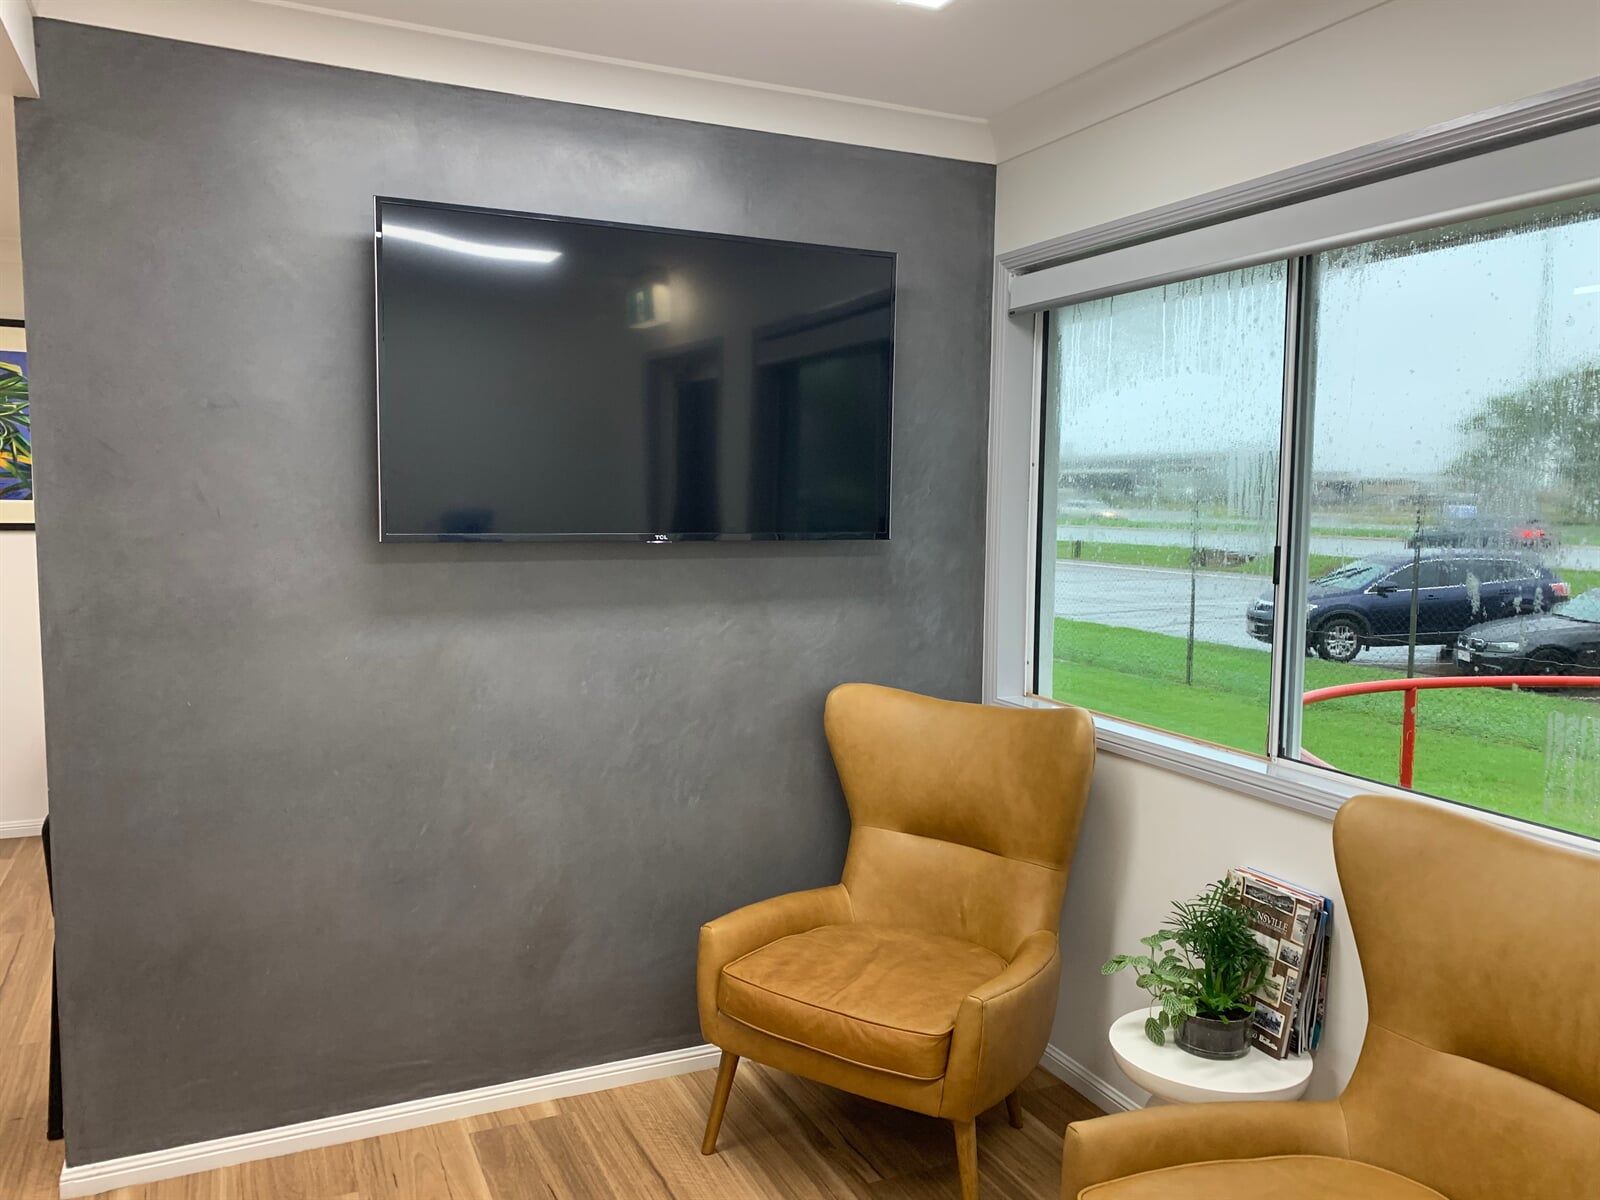 Interior Wall - Townsville Texture Coating